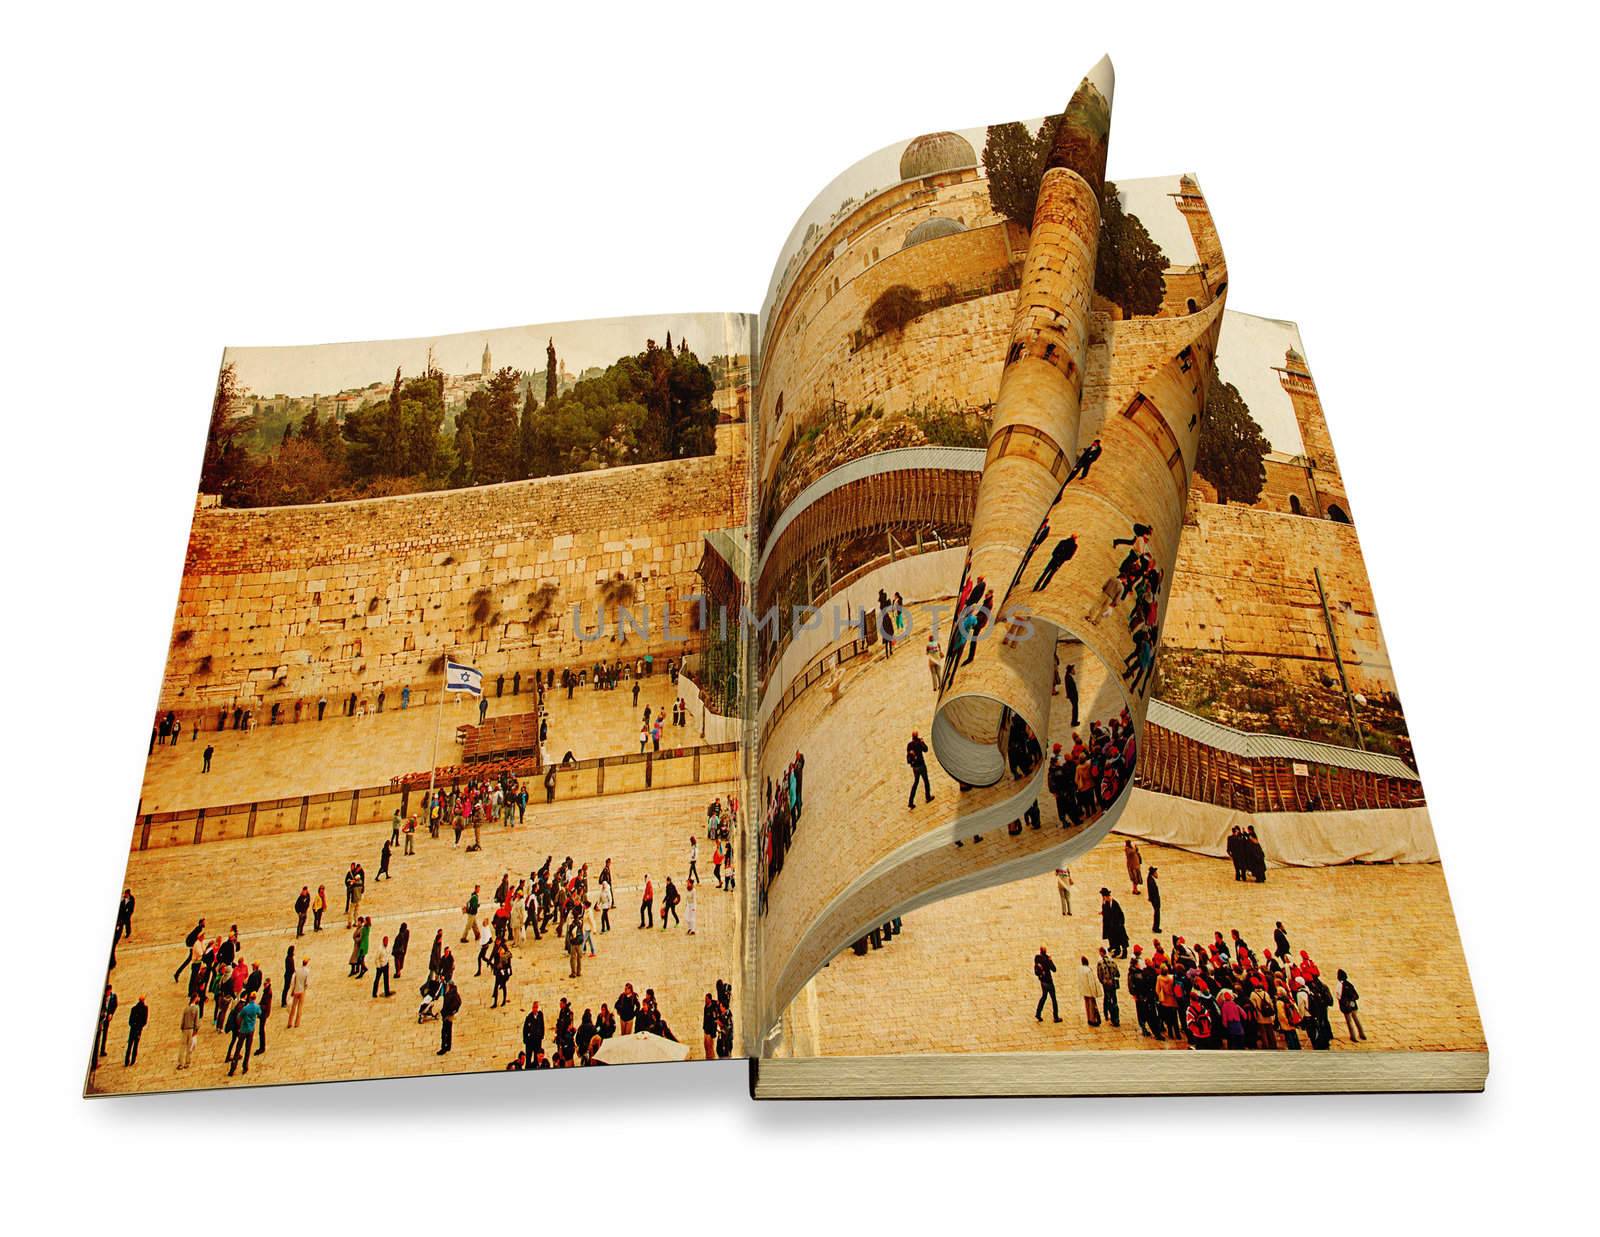 An opened old book with curl a picture Western Wall,Temple Mount, Jerusalem, Israel. Photo in old color image style on white background